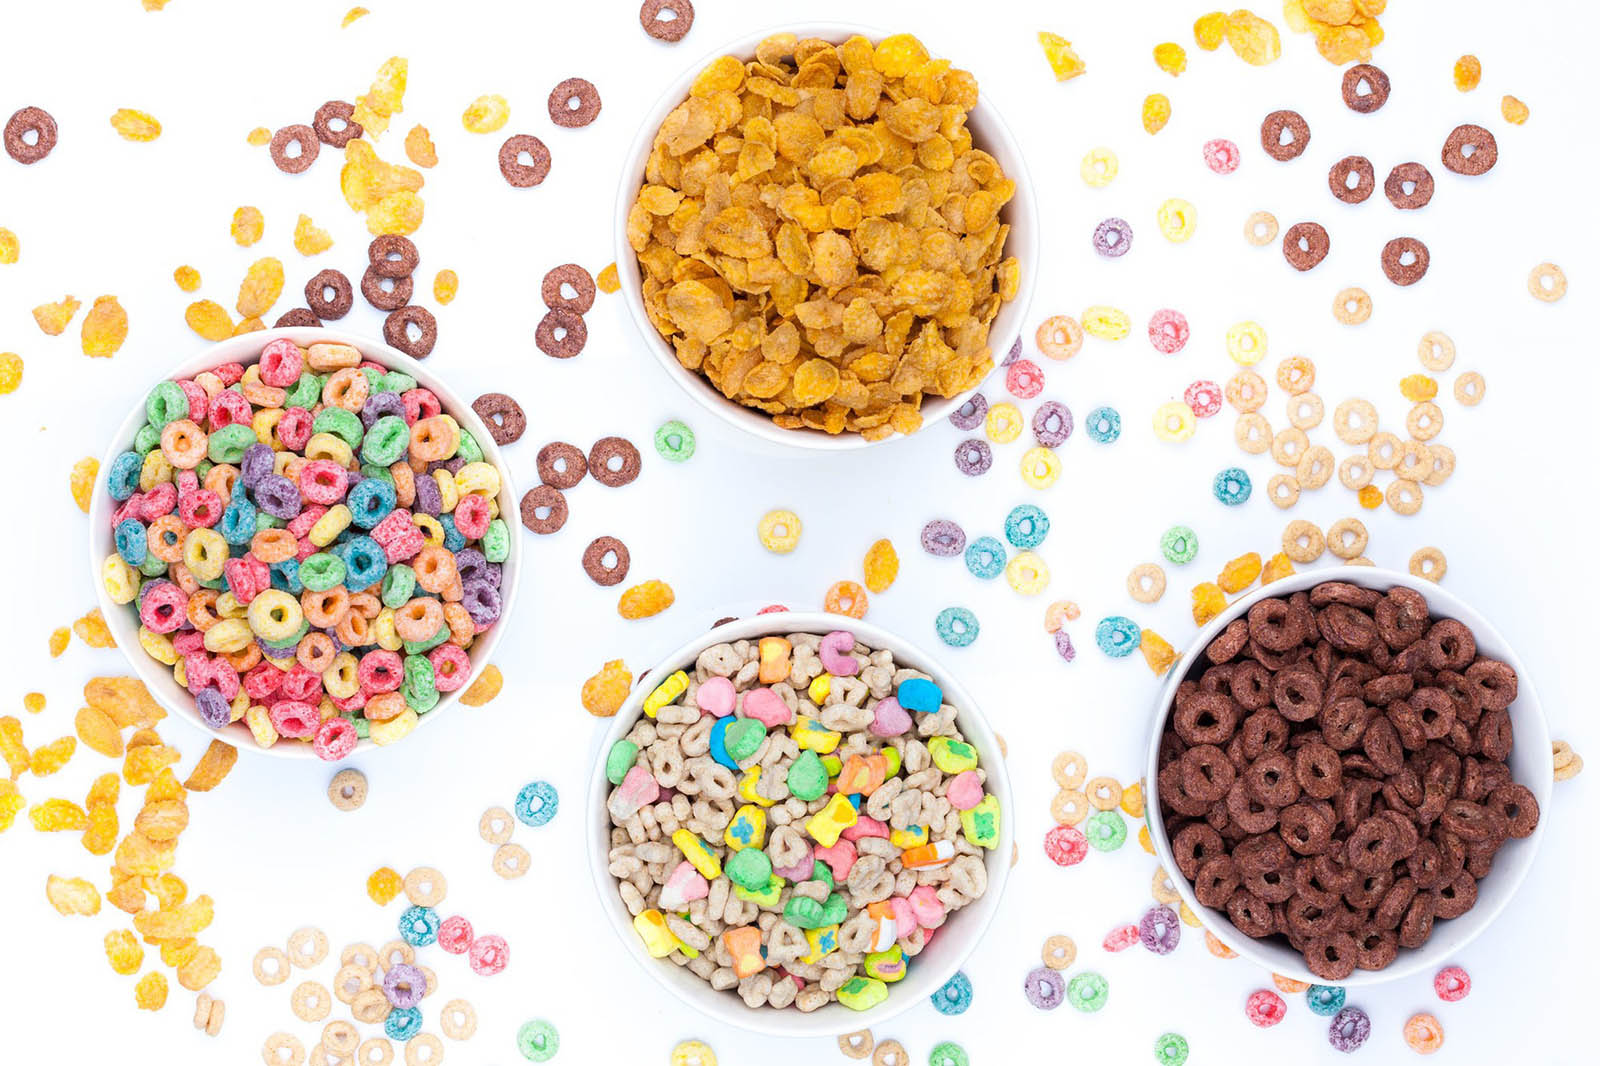 Are You an Older or Younger Person? 🥨 Choose Some Typical Snacks and We’ll Guess Breakfast Cereal